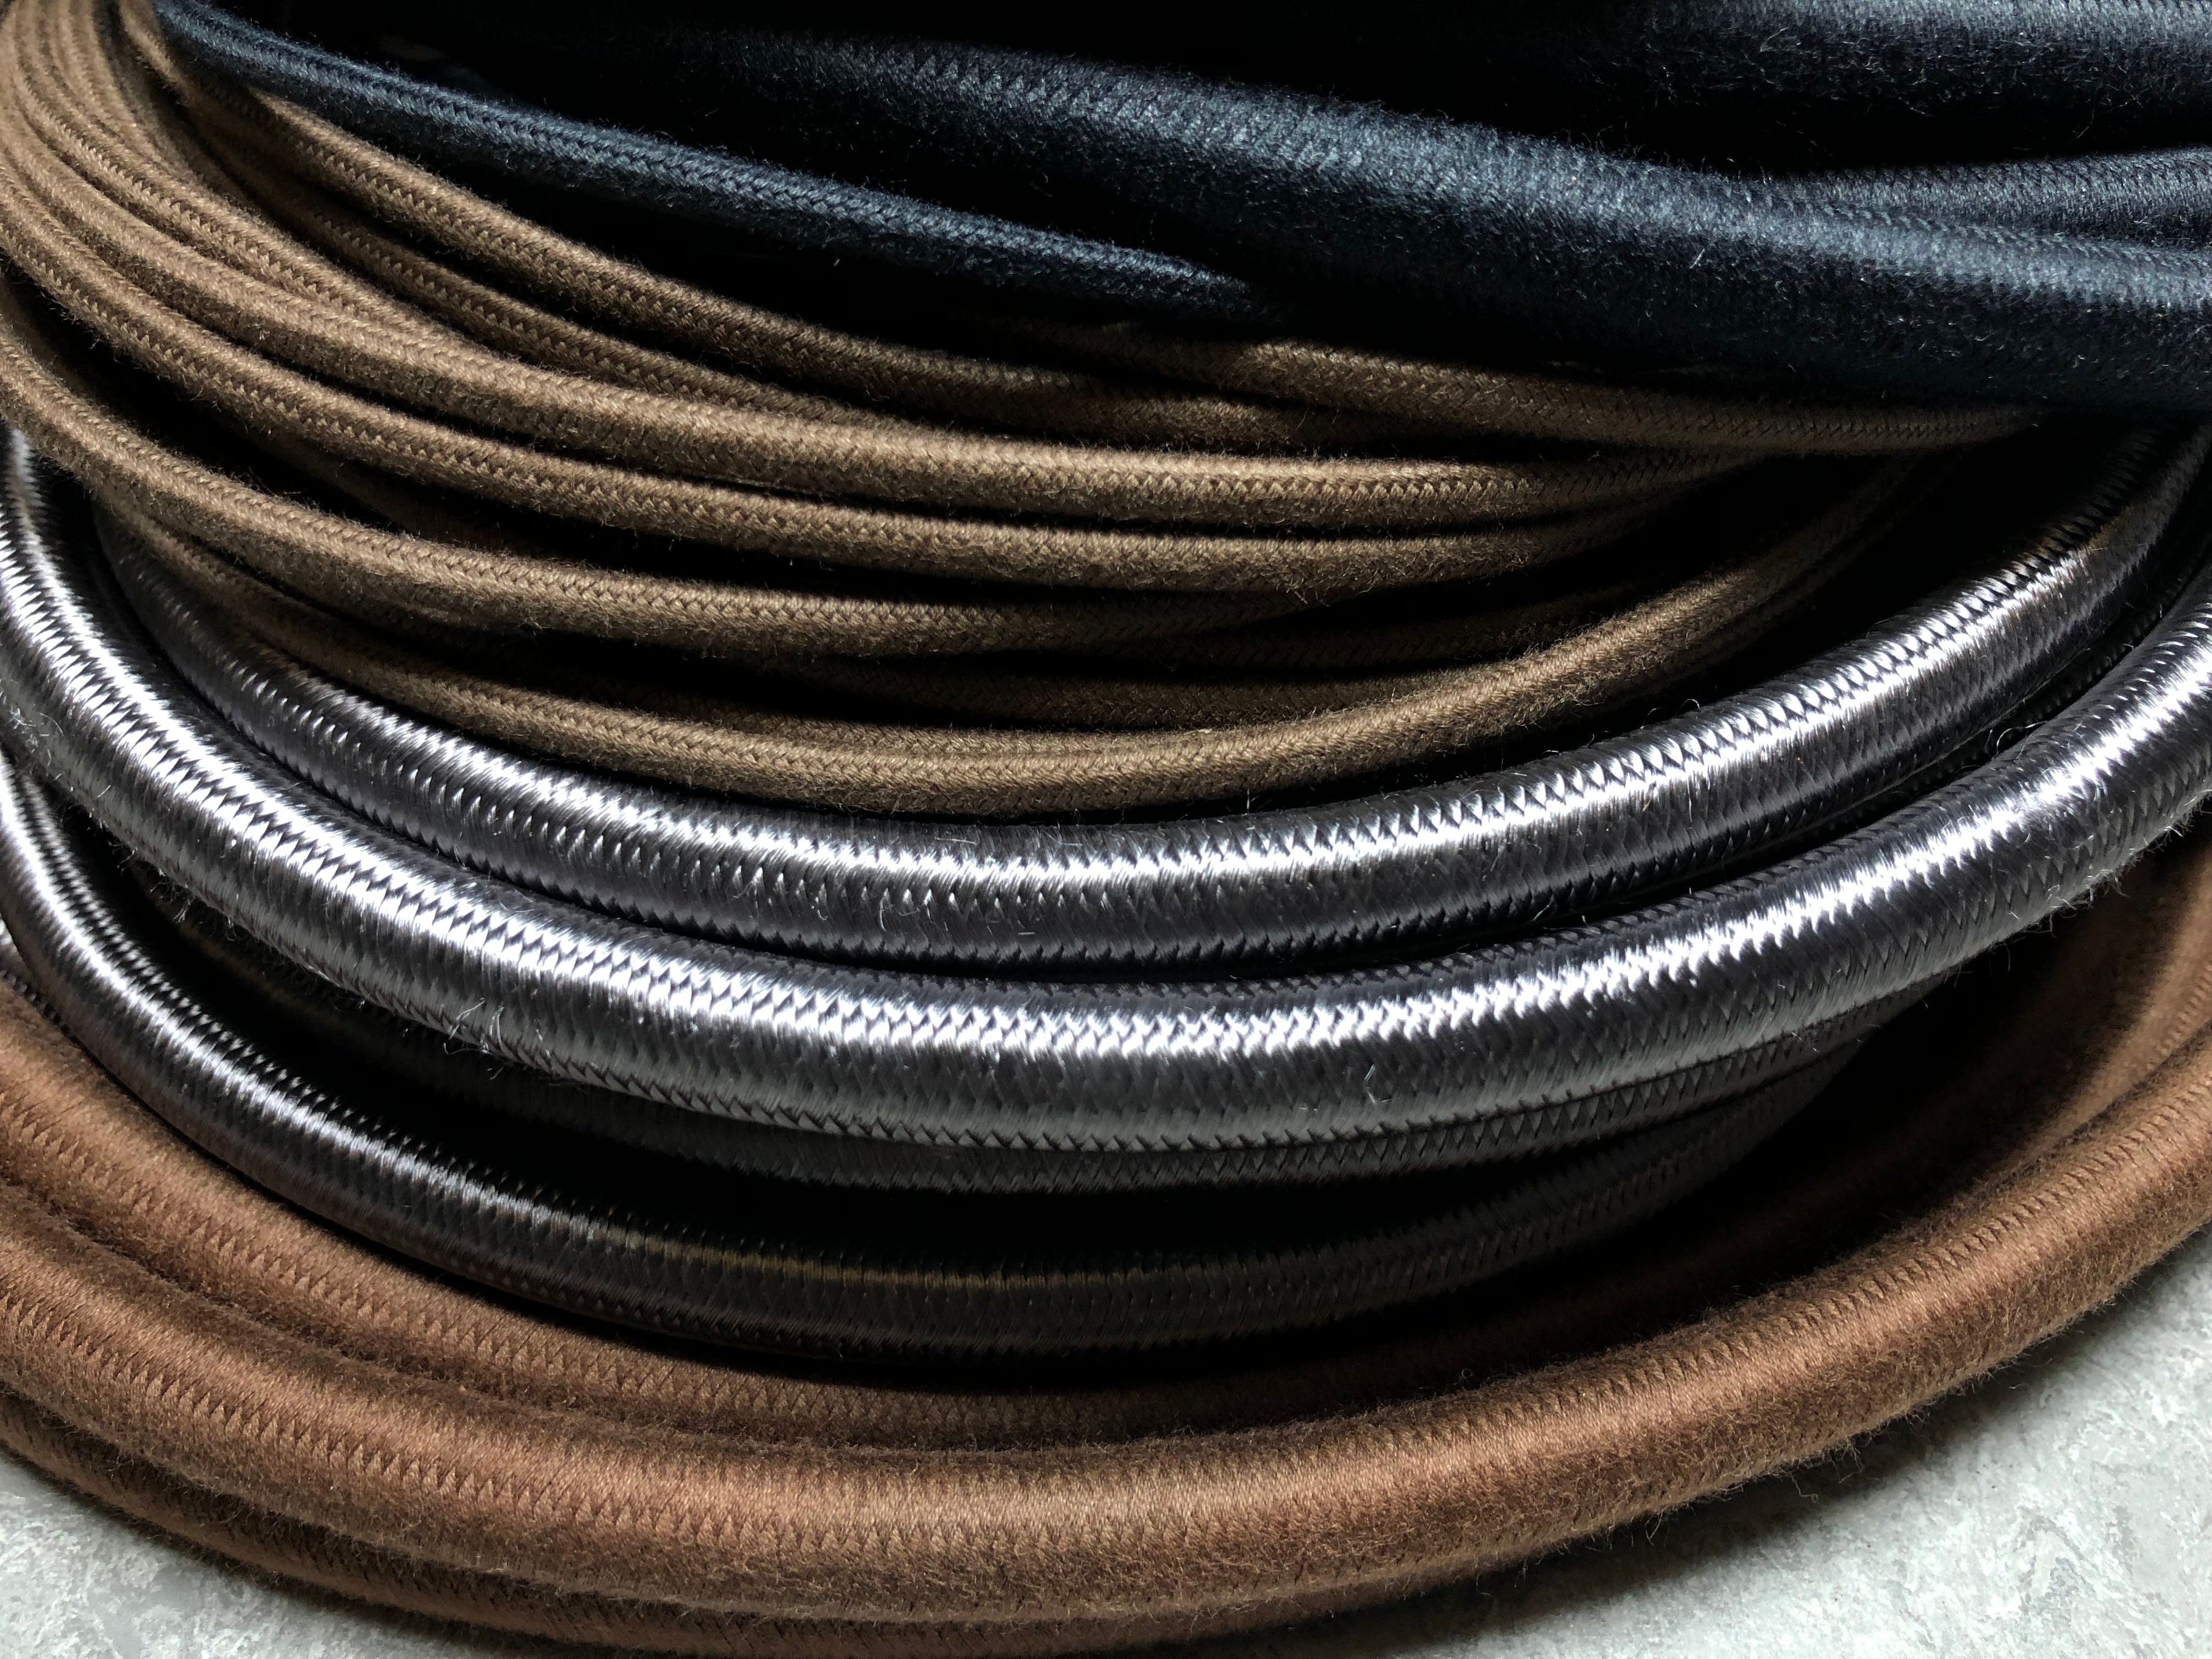 14-gauge cloth-covered wire